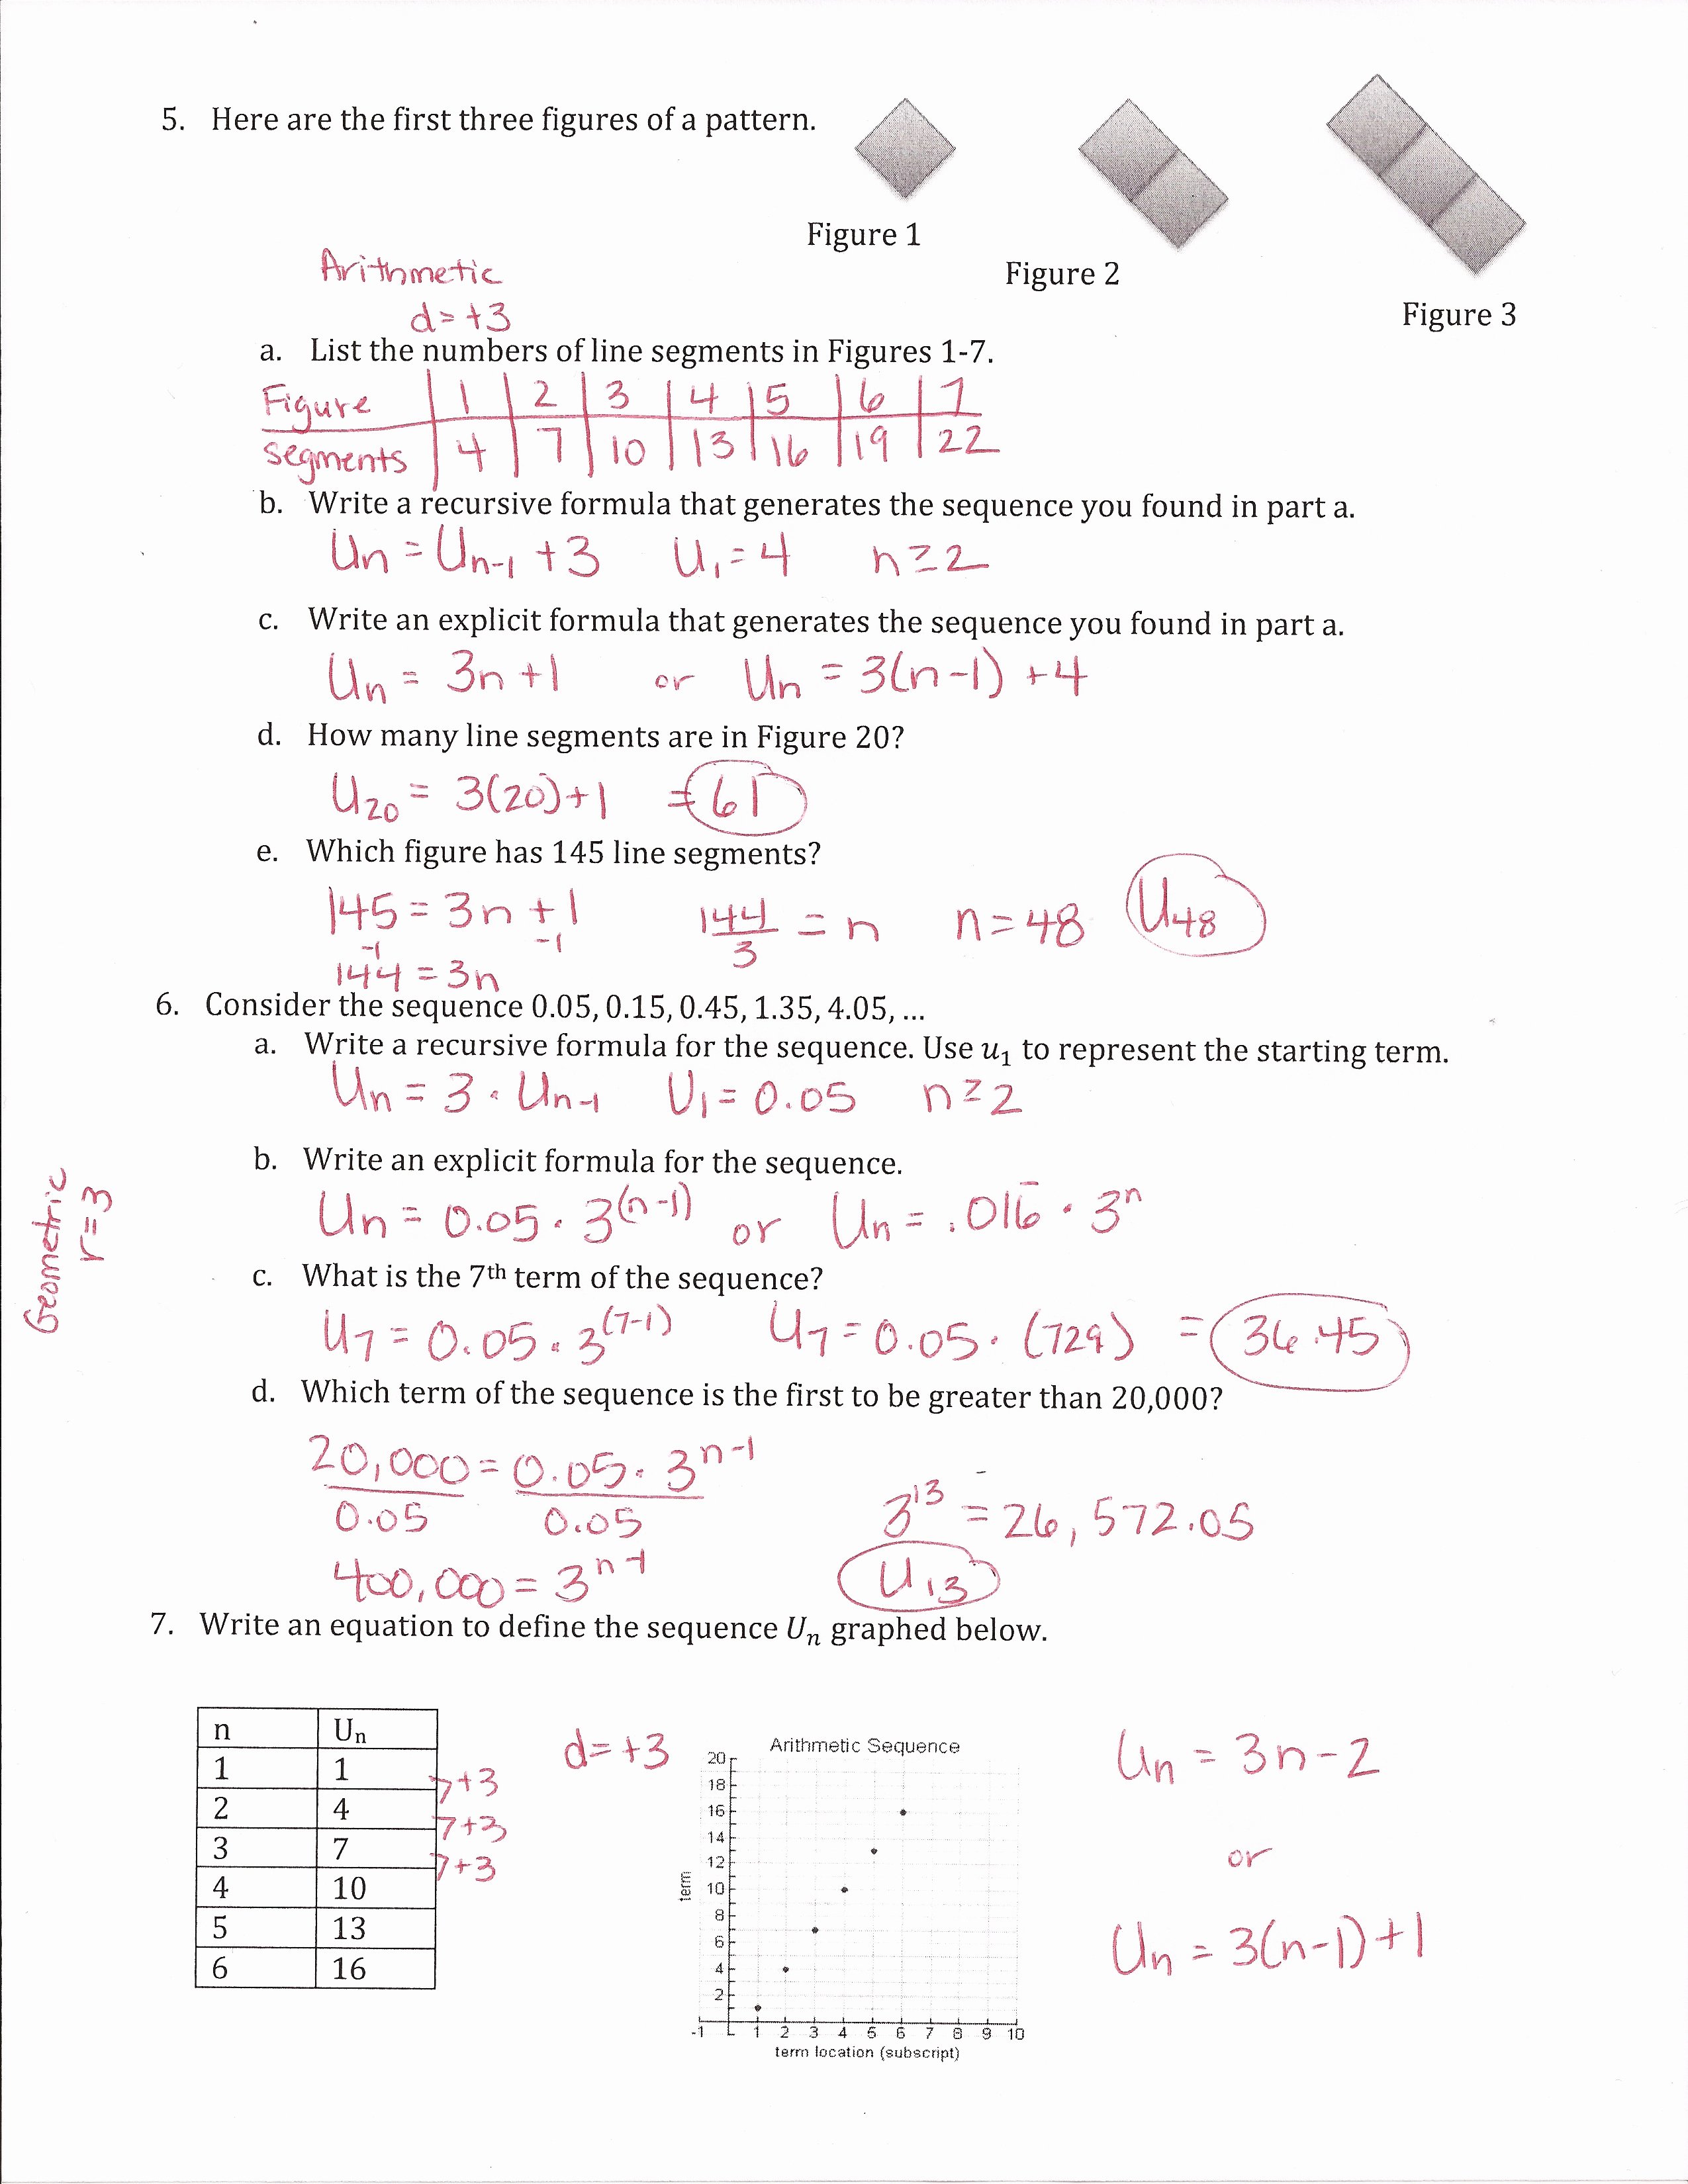 Geometric Sequences Worksheet Answers Luxury Dentrodabiblia Arithmetic Sequences Worksheet Answers